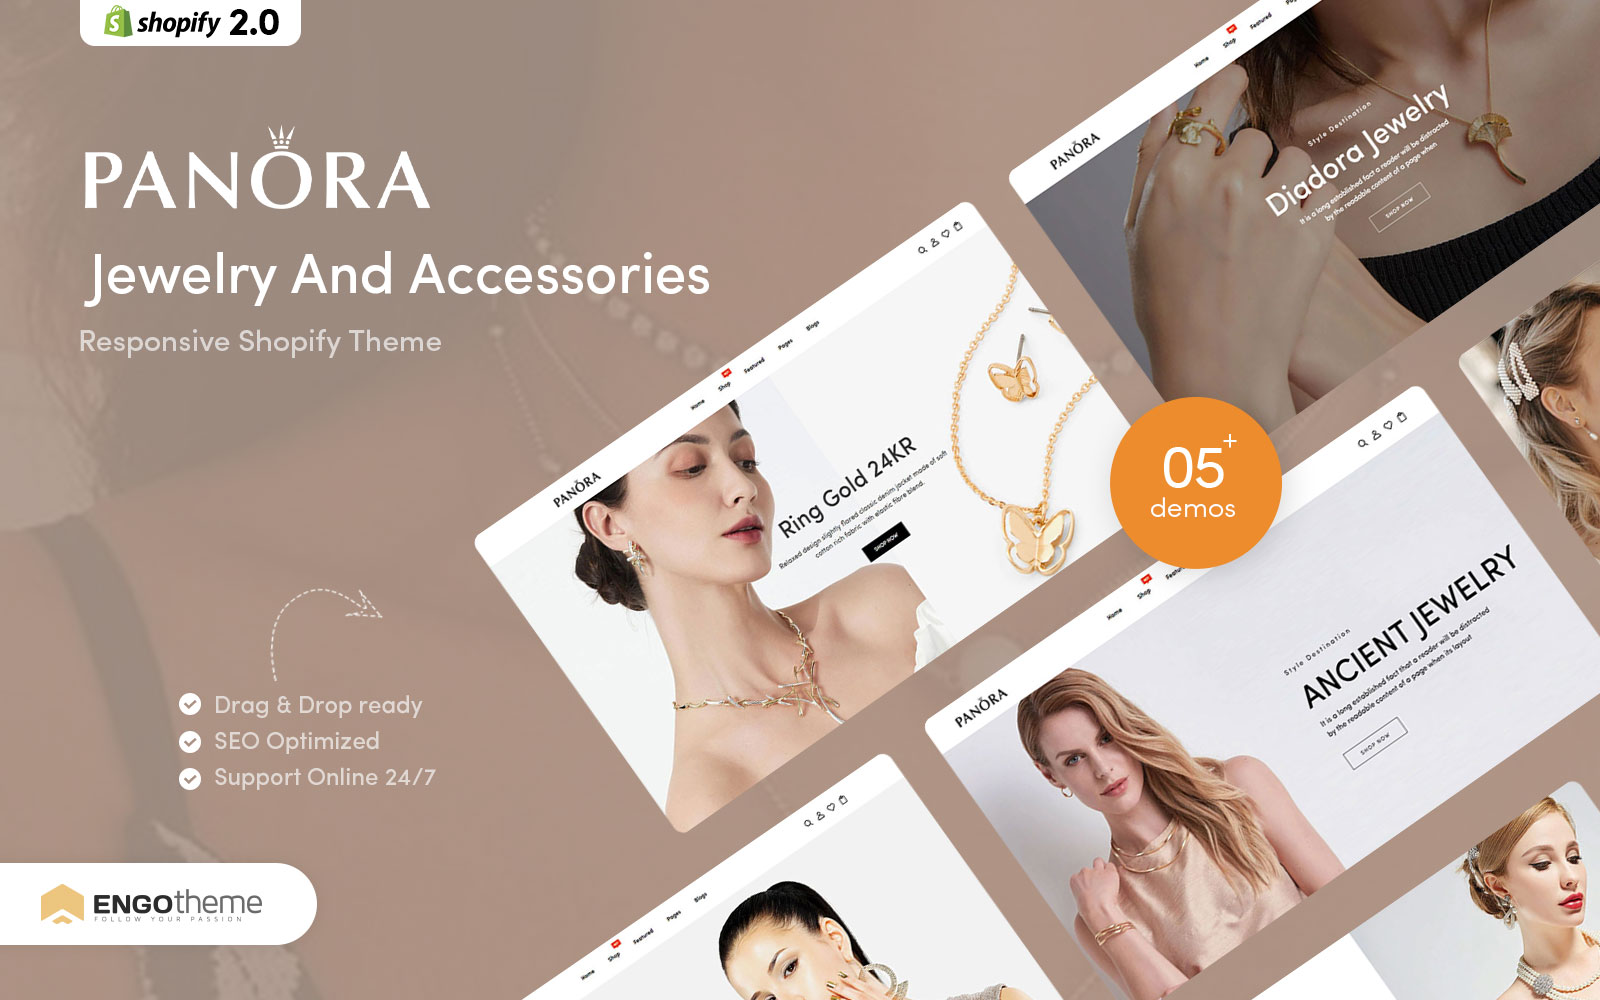 Panora - Jewelry And Accessories Responsive Shopify Theme